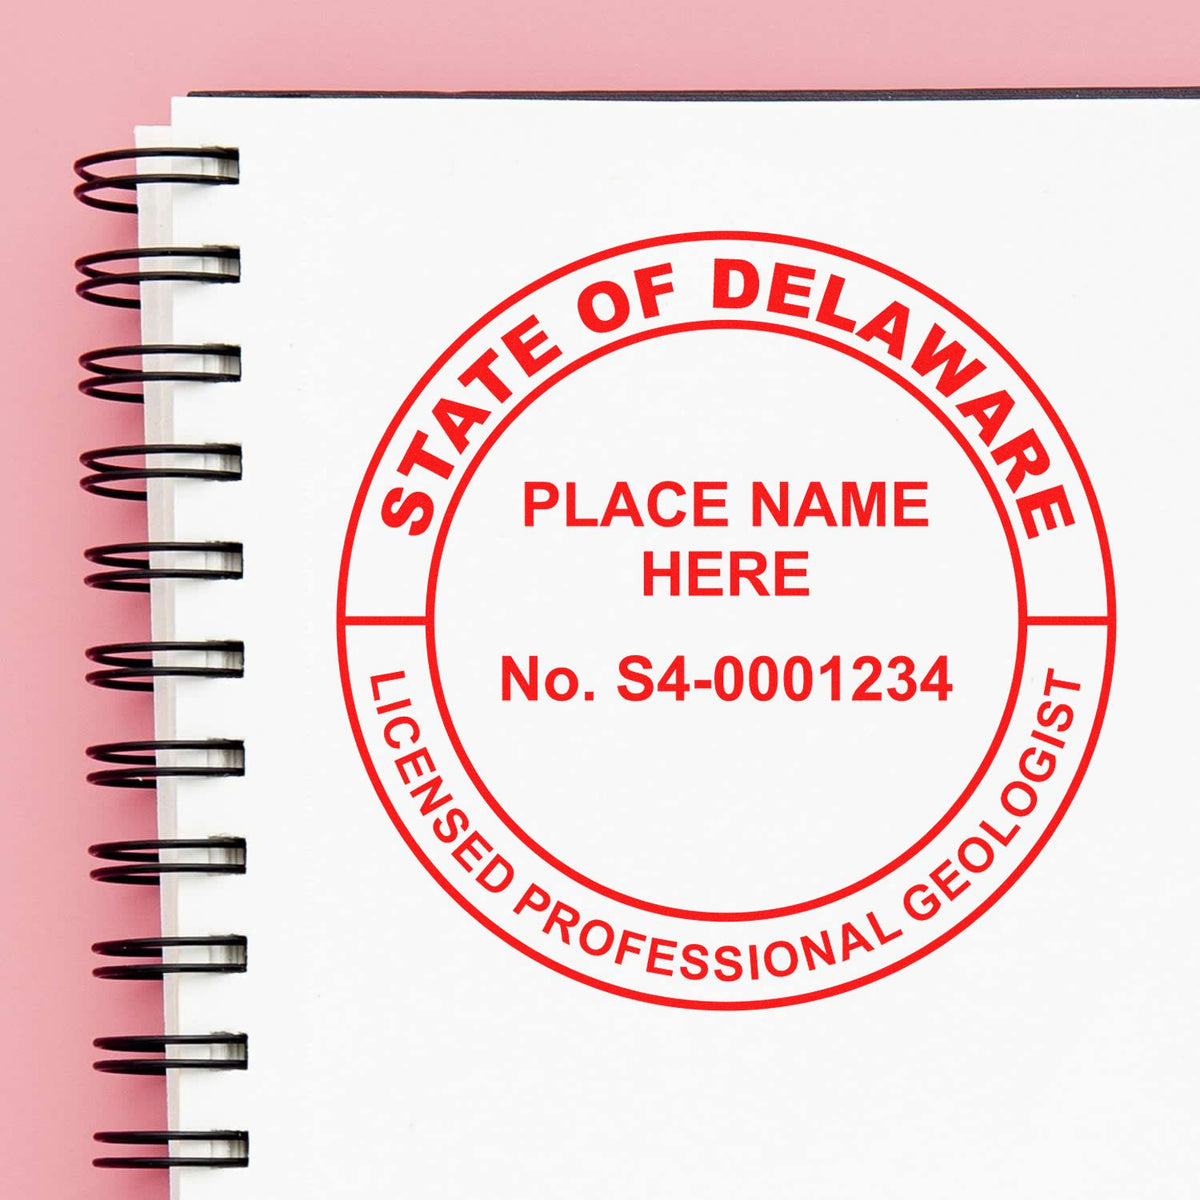 An in use photo of the Delaware Professional Geologist Seal Stamp showing a sample imprint on a cardstock